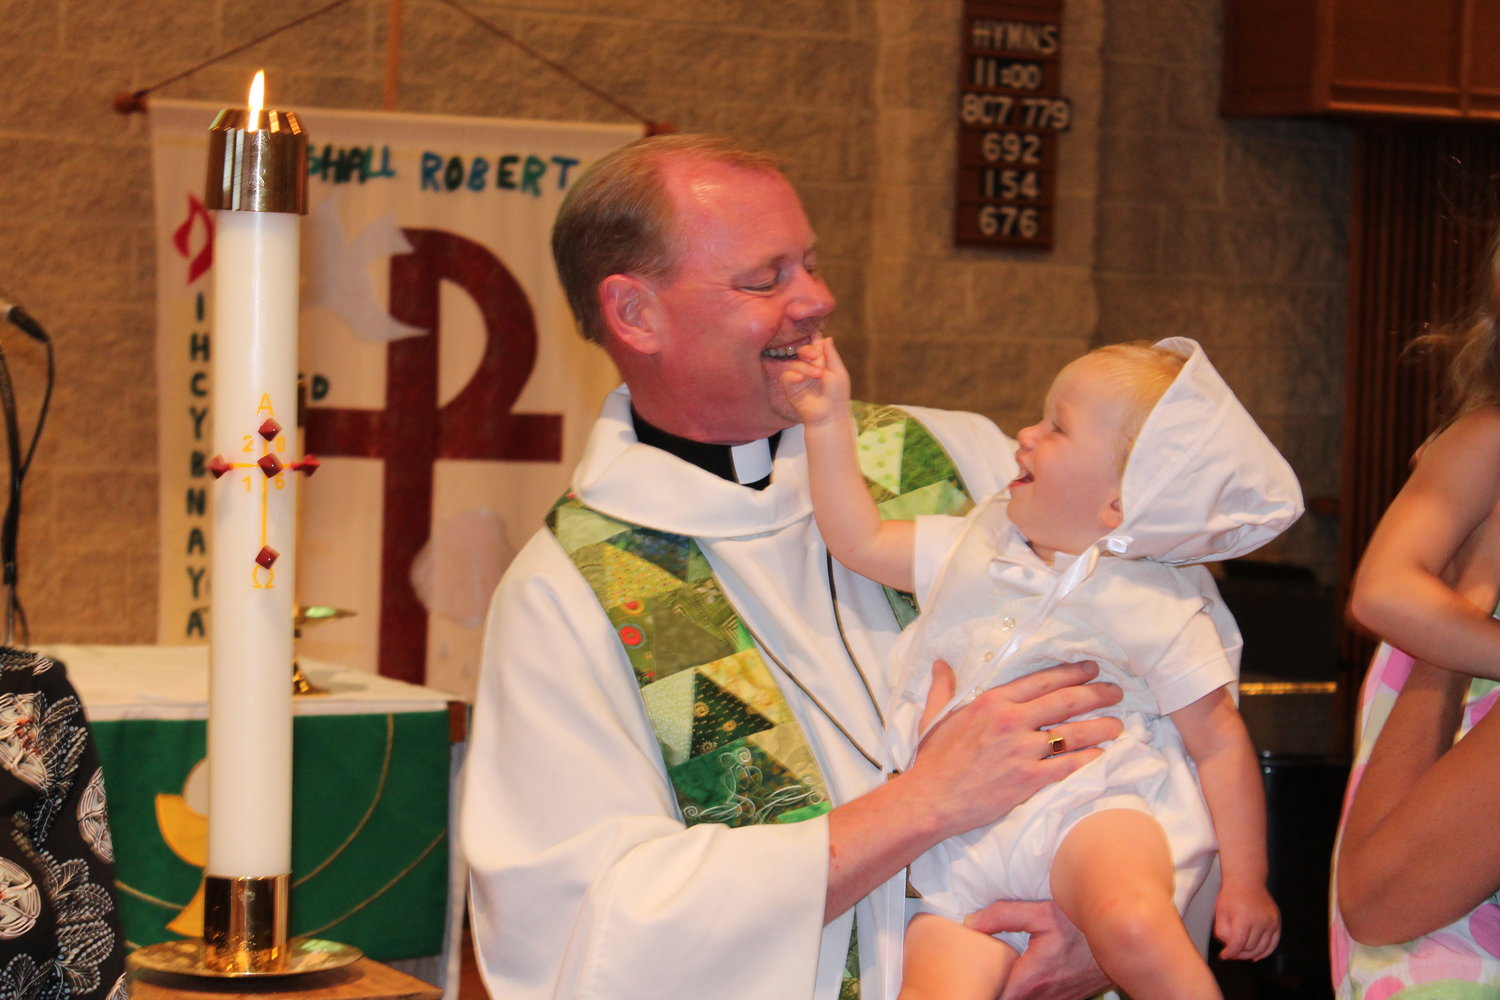 Reverend Shawn Brandon said celebrating sacraments, including the sacrament of baptism, is one of his favorite parts of the job.